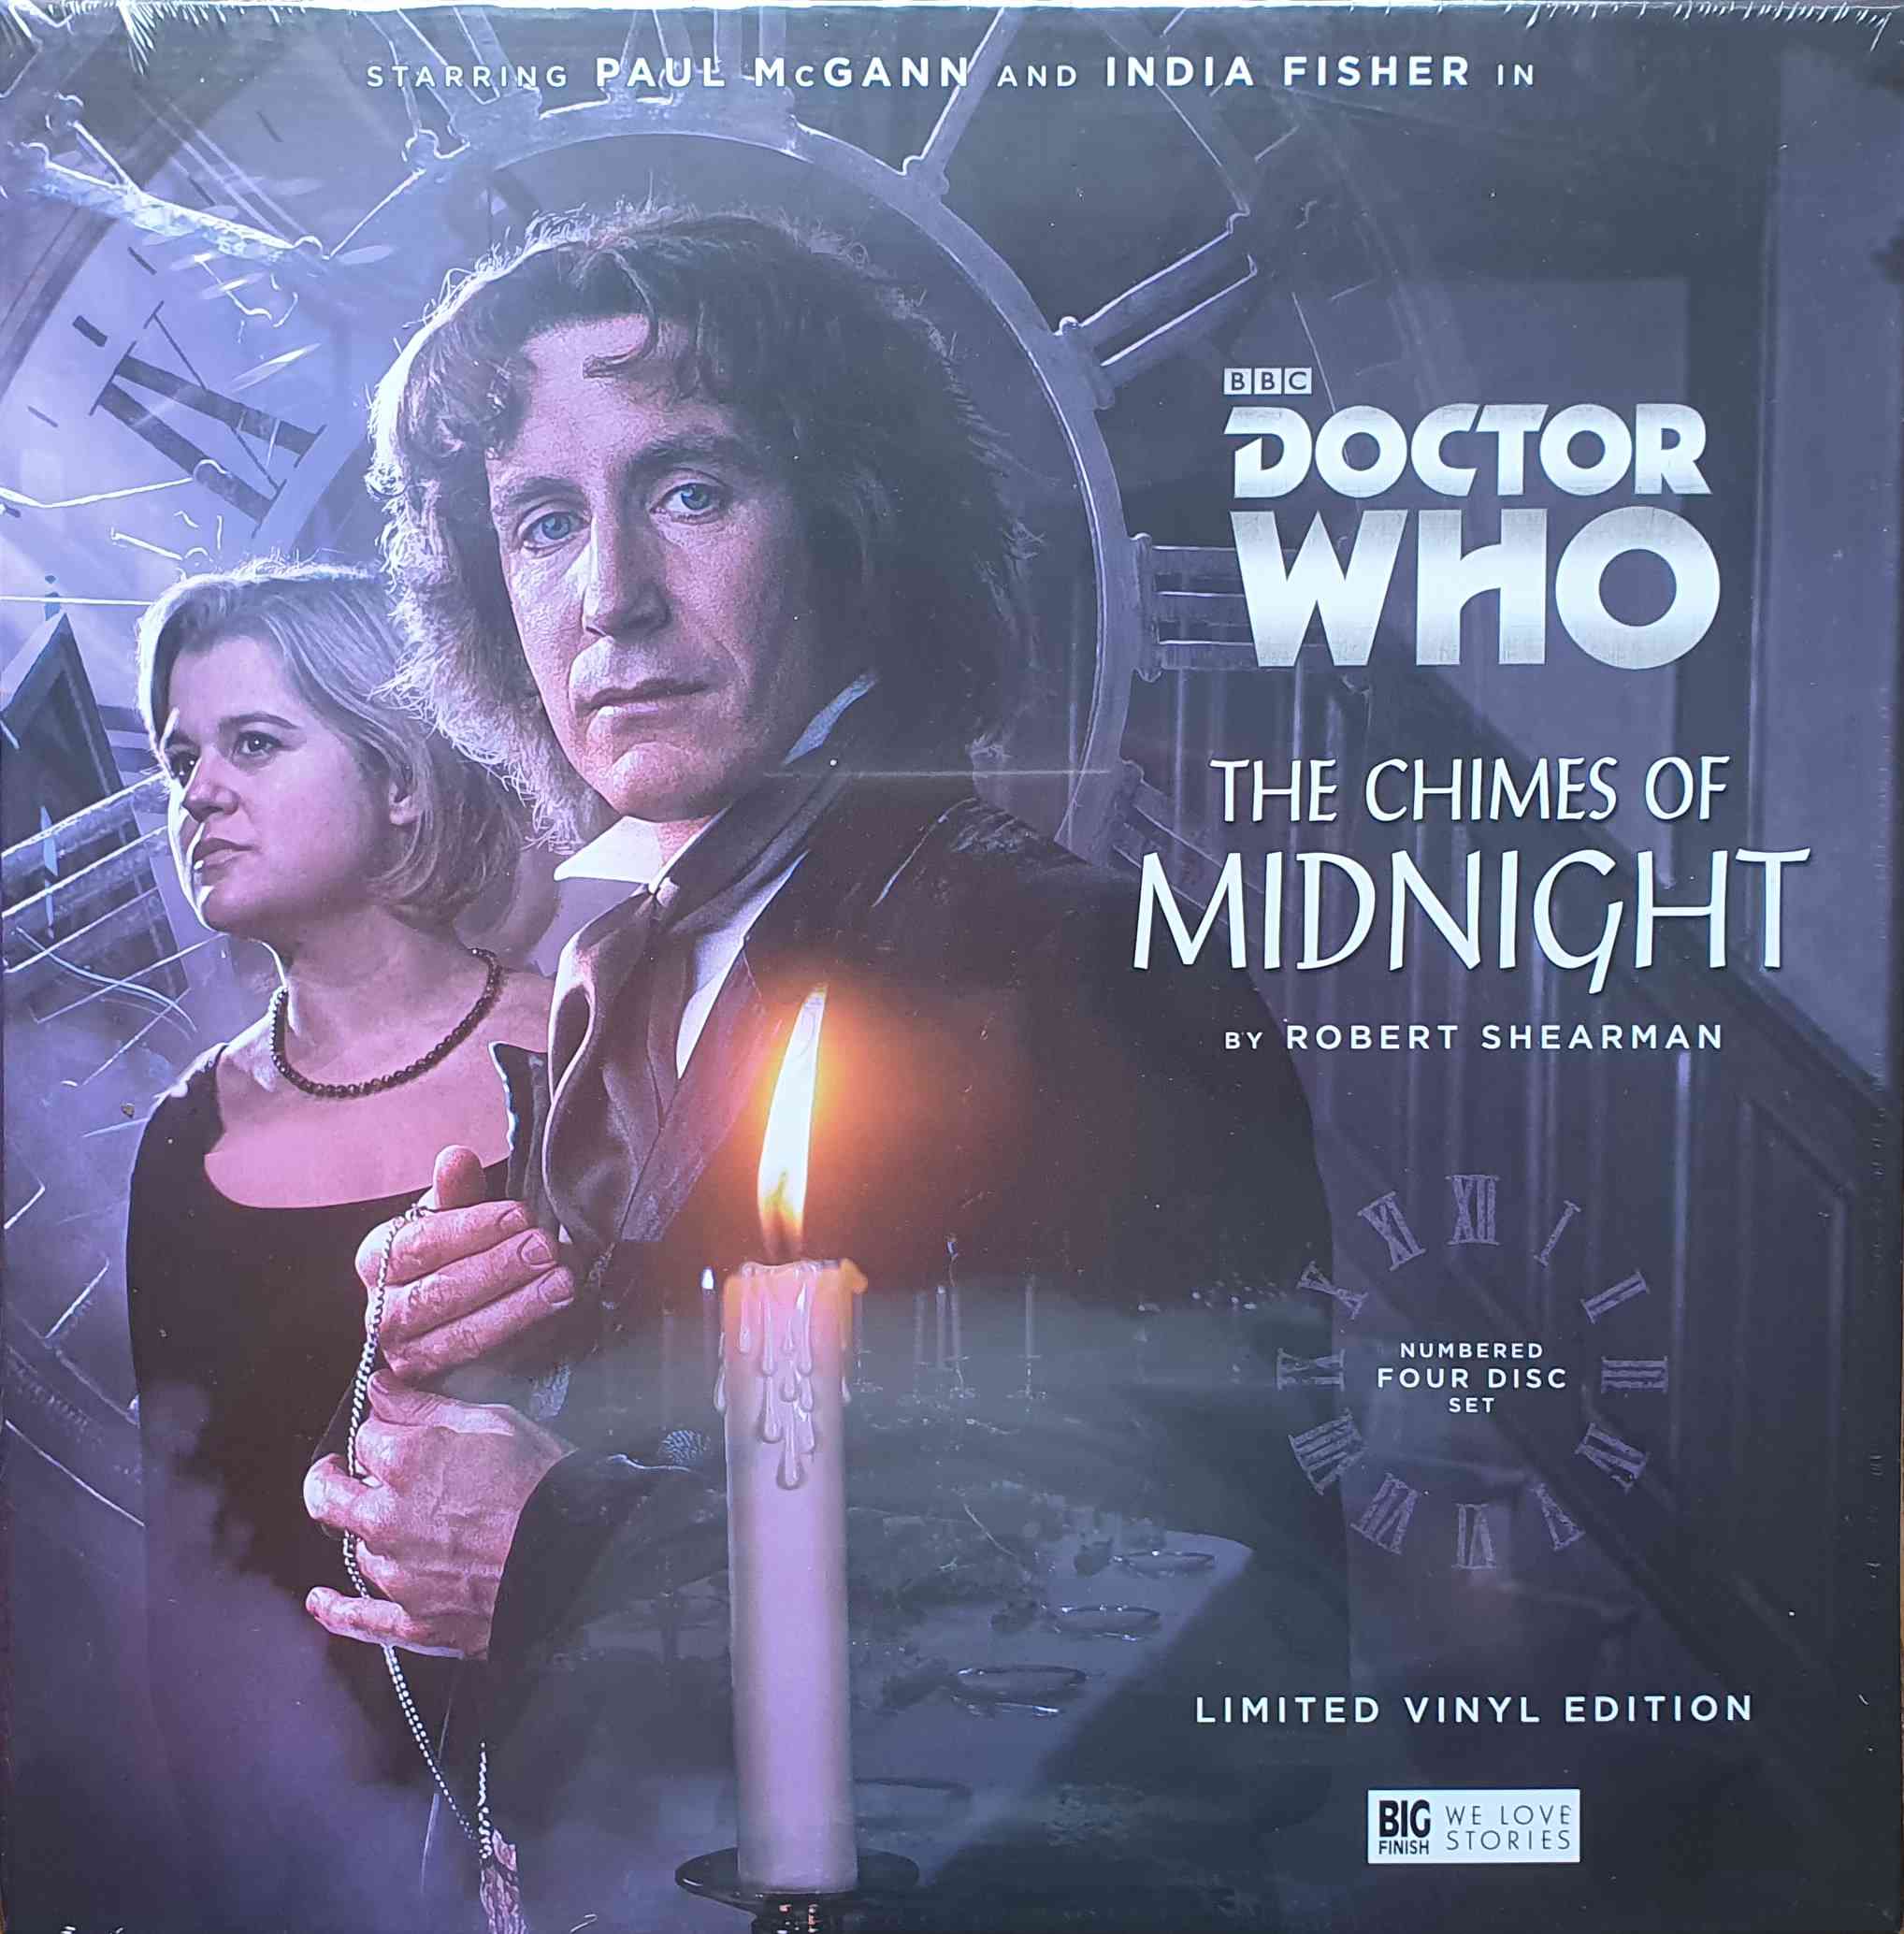 Picture of Doctor Who - The chimes of midnight by artist Robert Shearman from the BBC albums - Records and Tapes library